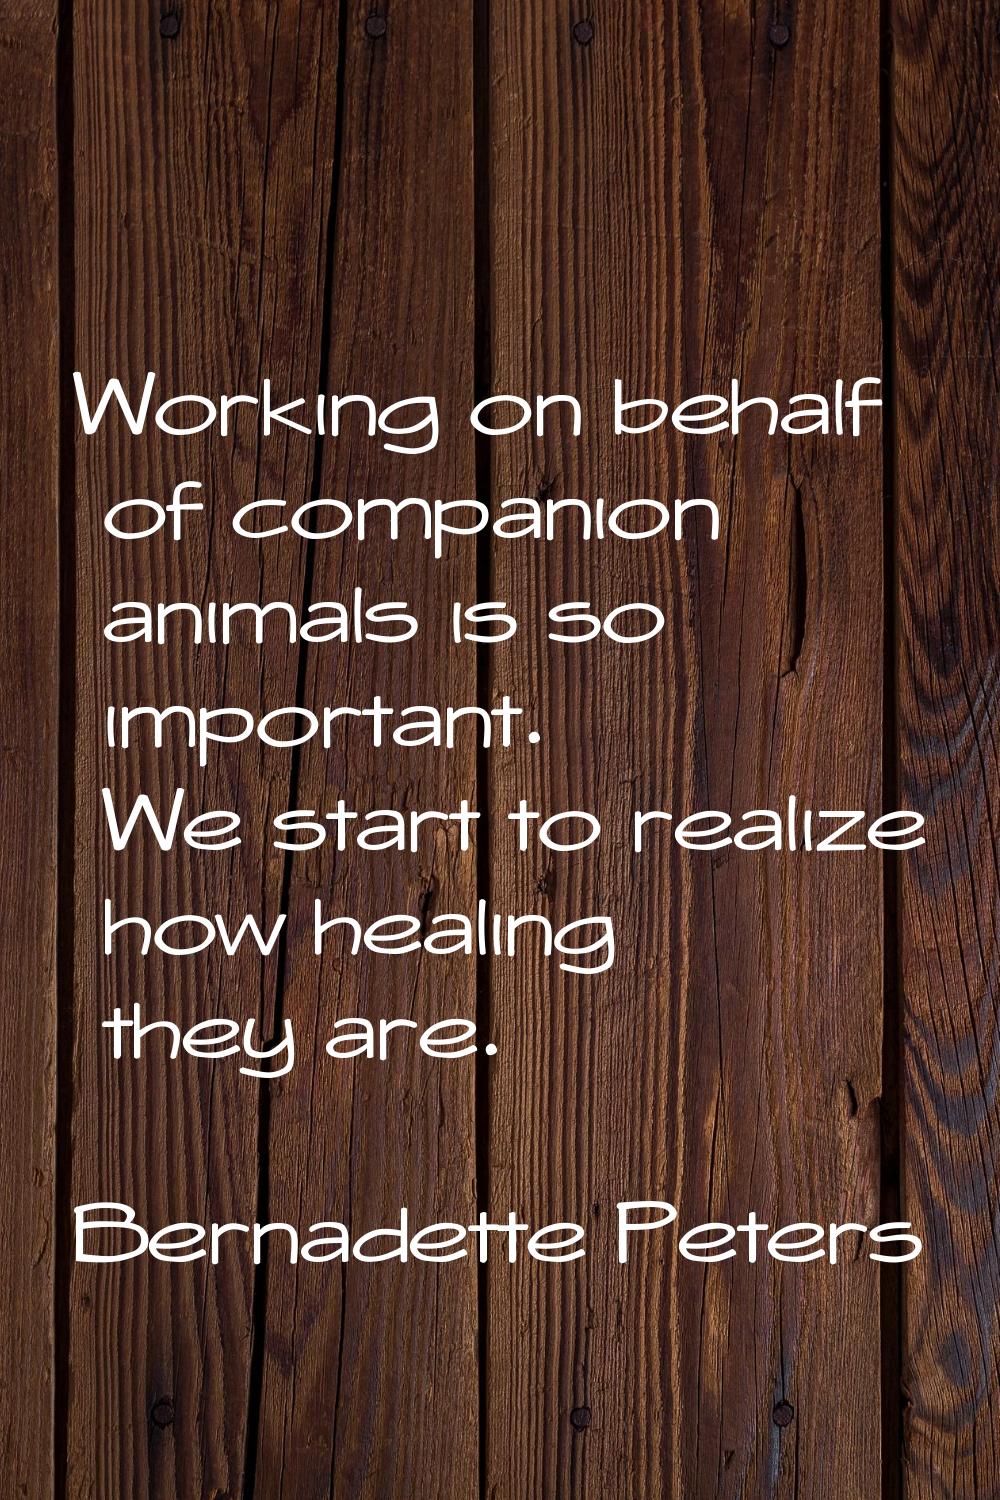 Working on behalf of companion animals is so important. We start to realize how healing they are.